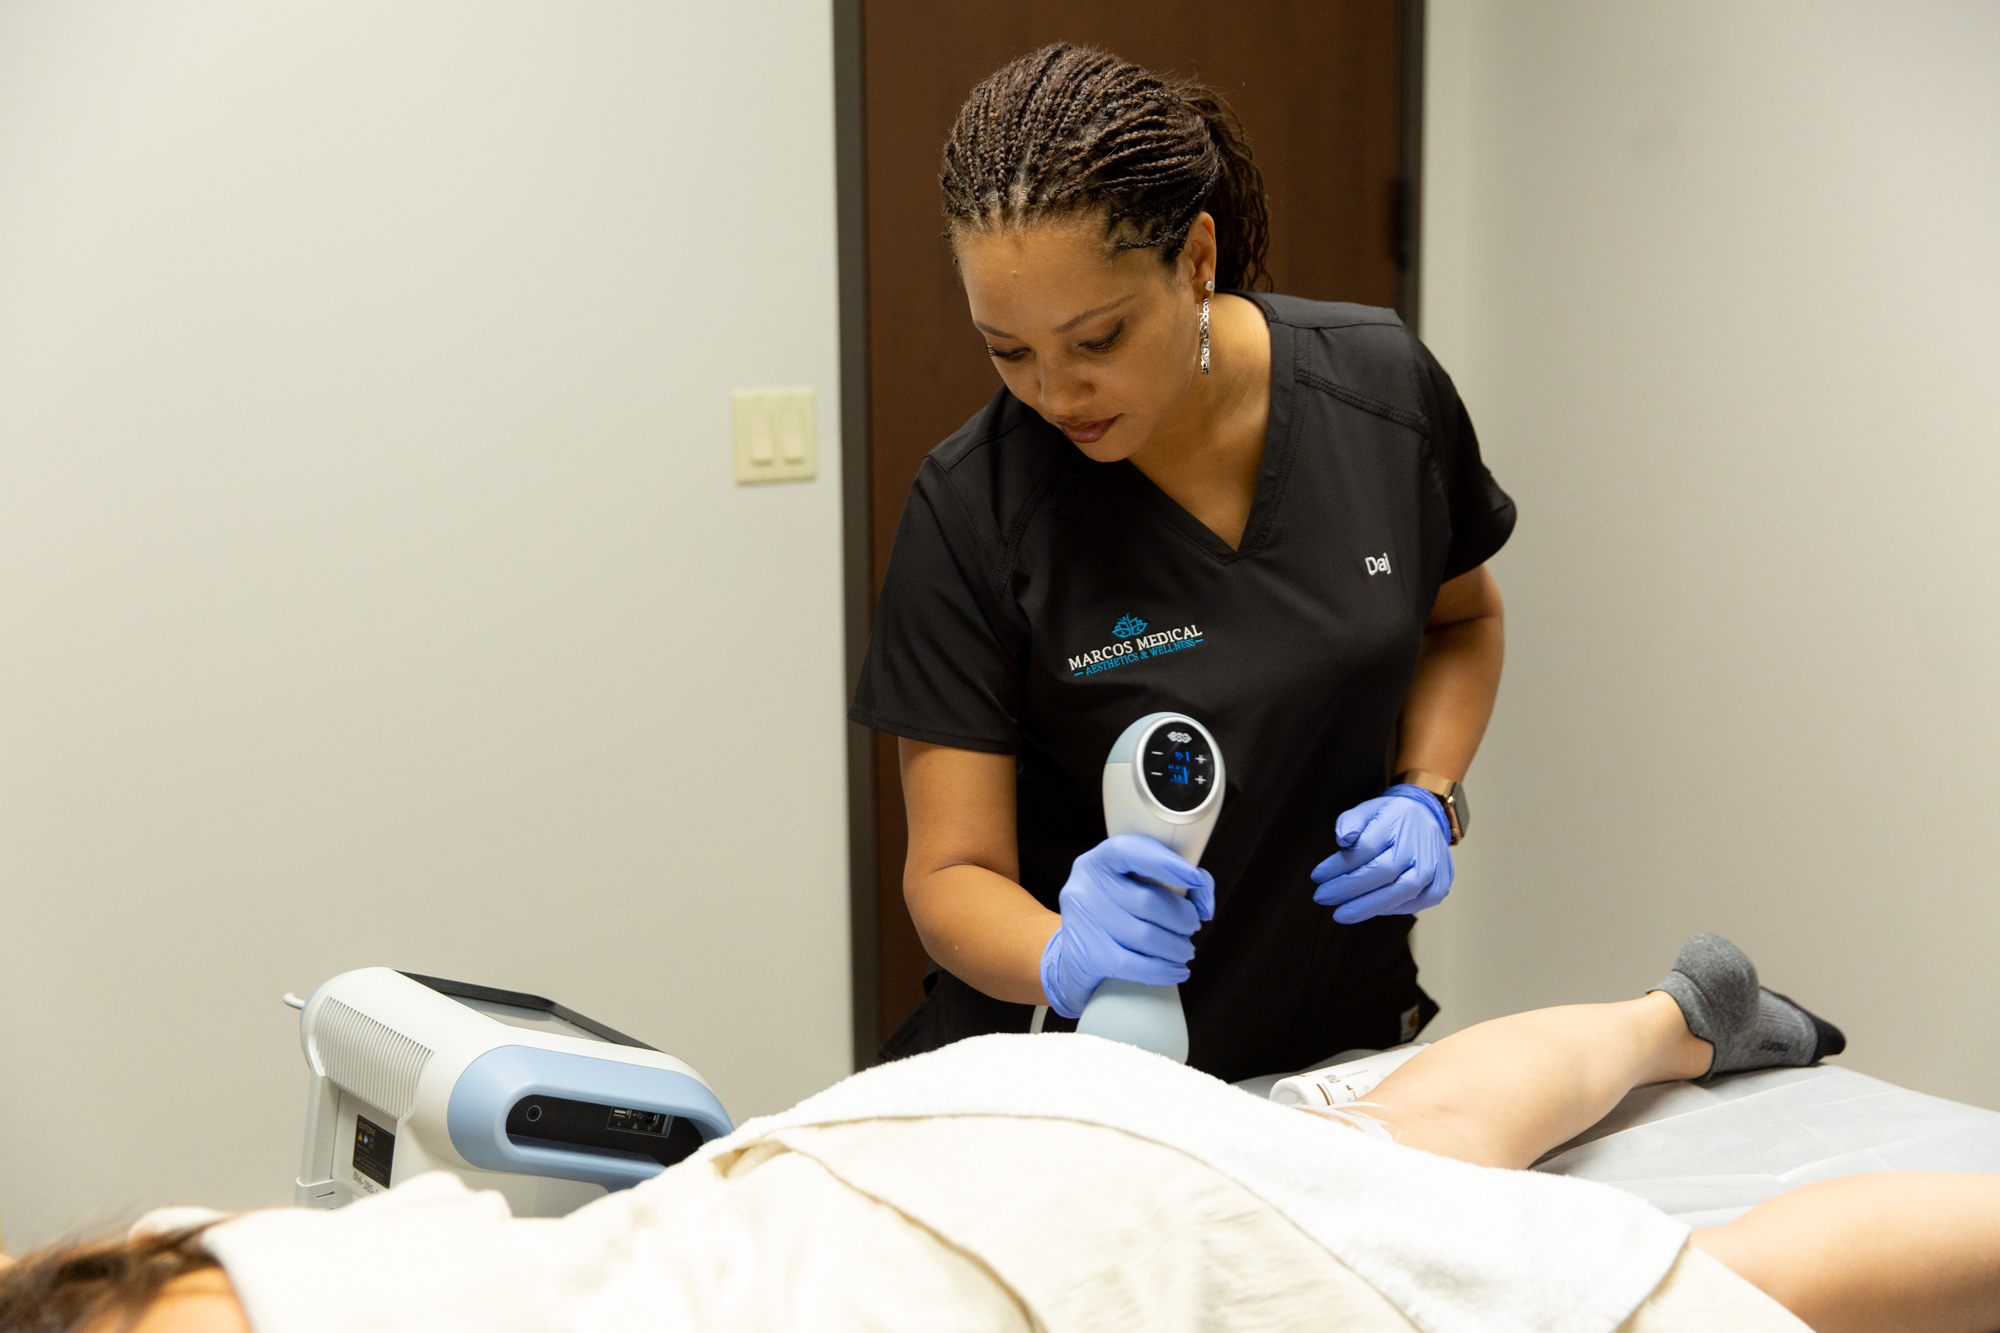 A female Marcos Medical Provider uses the Emtone handheld tool on a patient's thigh. The patient is laying face down on the medical table and is covered by a towel except for their legs. The Emtone machine is by the bedside of the patient.